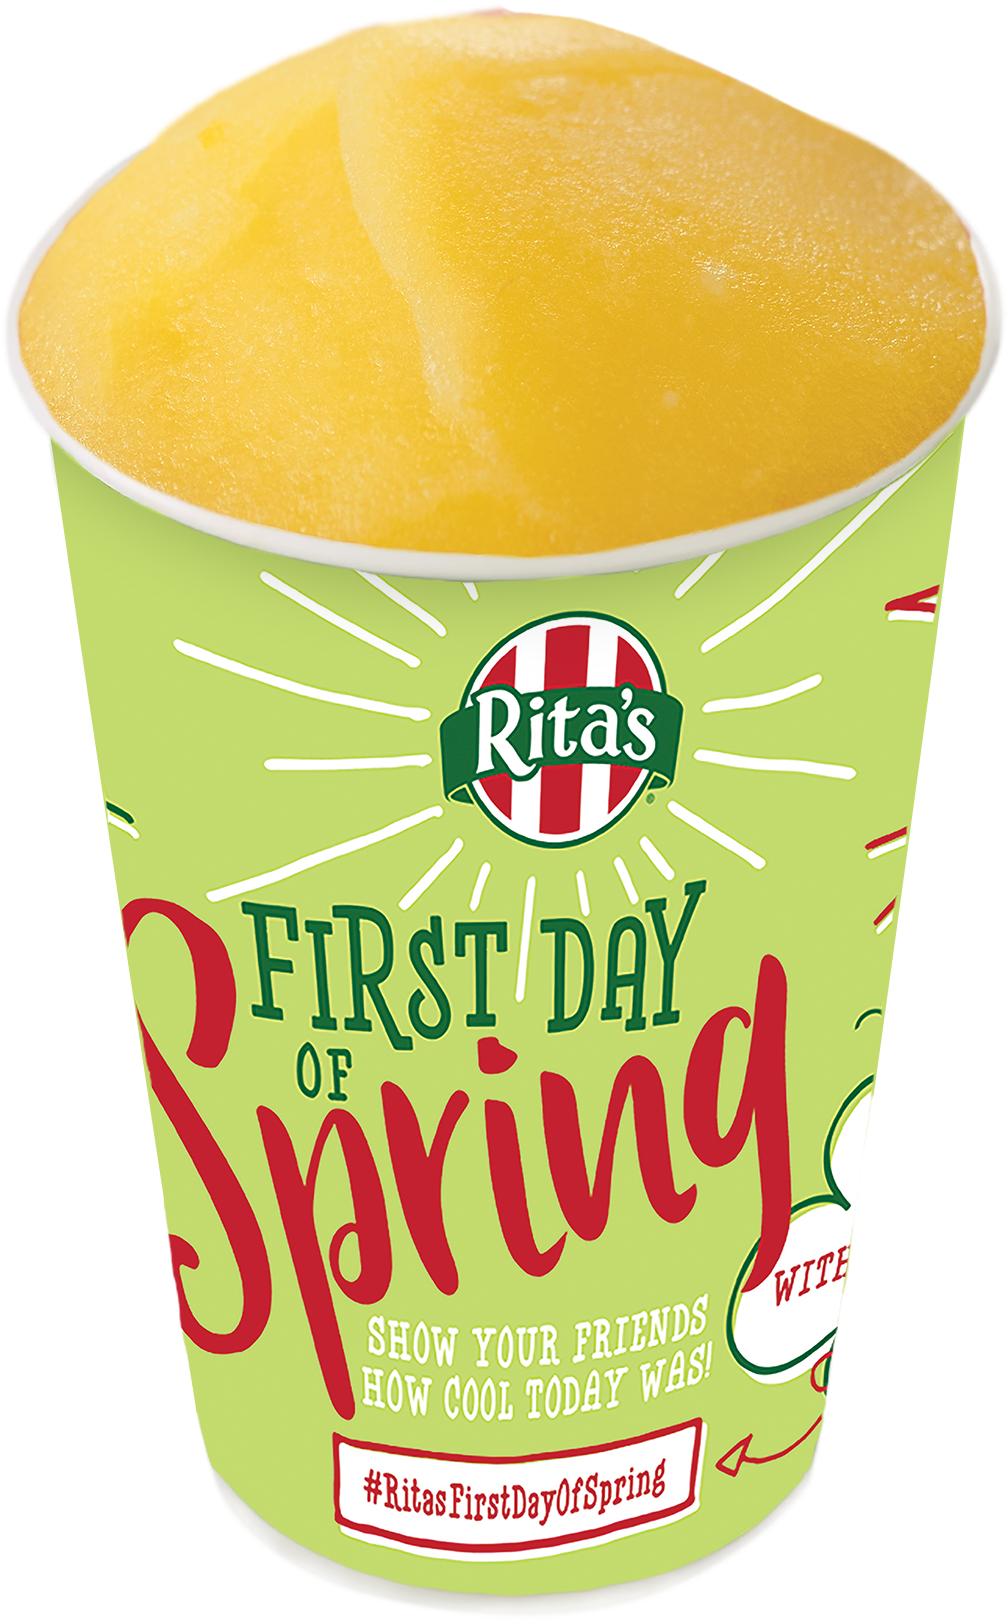 2017 First Day Of Spring Cup - Rita's First Day Of Spring 2018 (1008x1621)